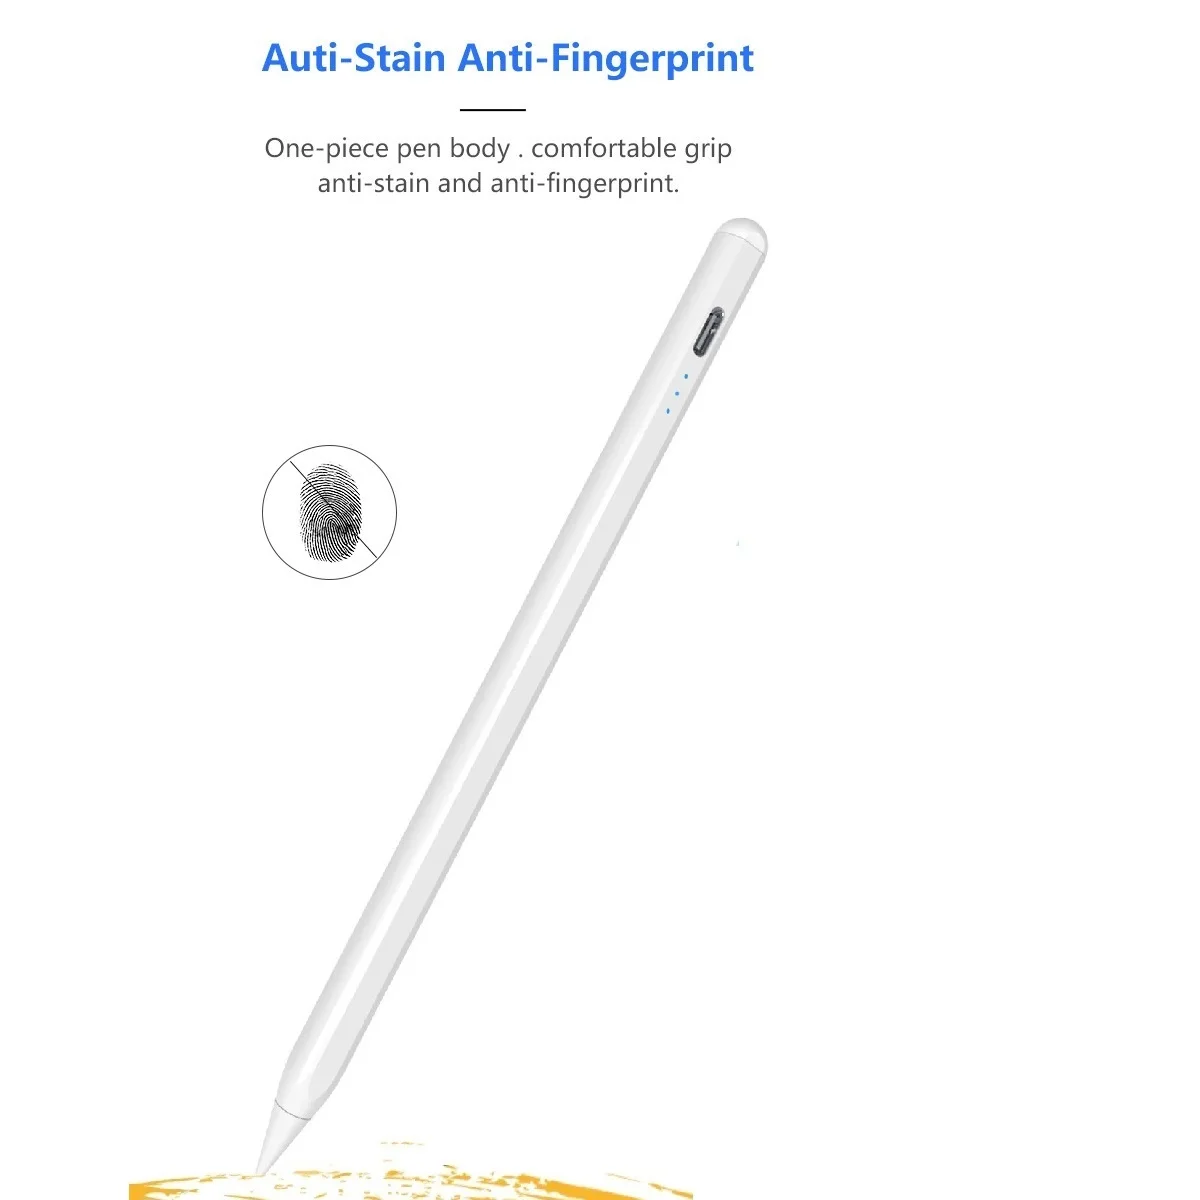 Universal Stylus Pencil for Capacitive Touch Screen Compatible with Android/IOS Cellphone/Most Smartphones and Tablets